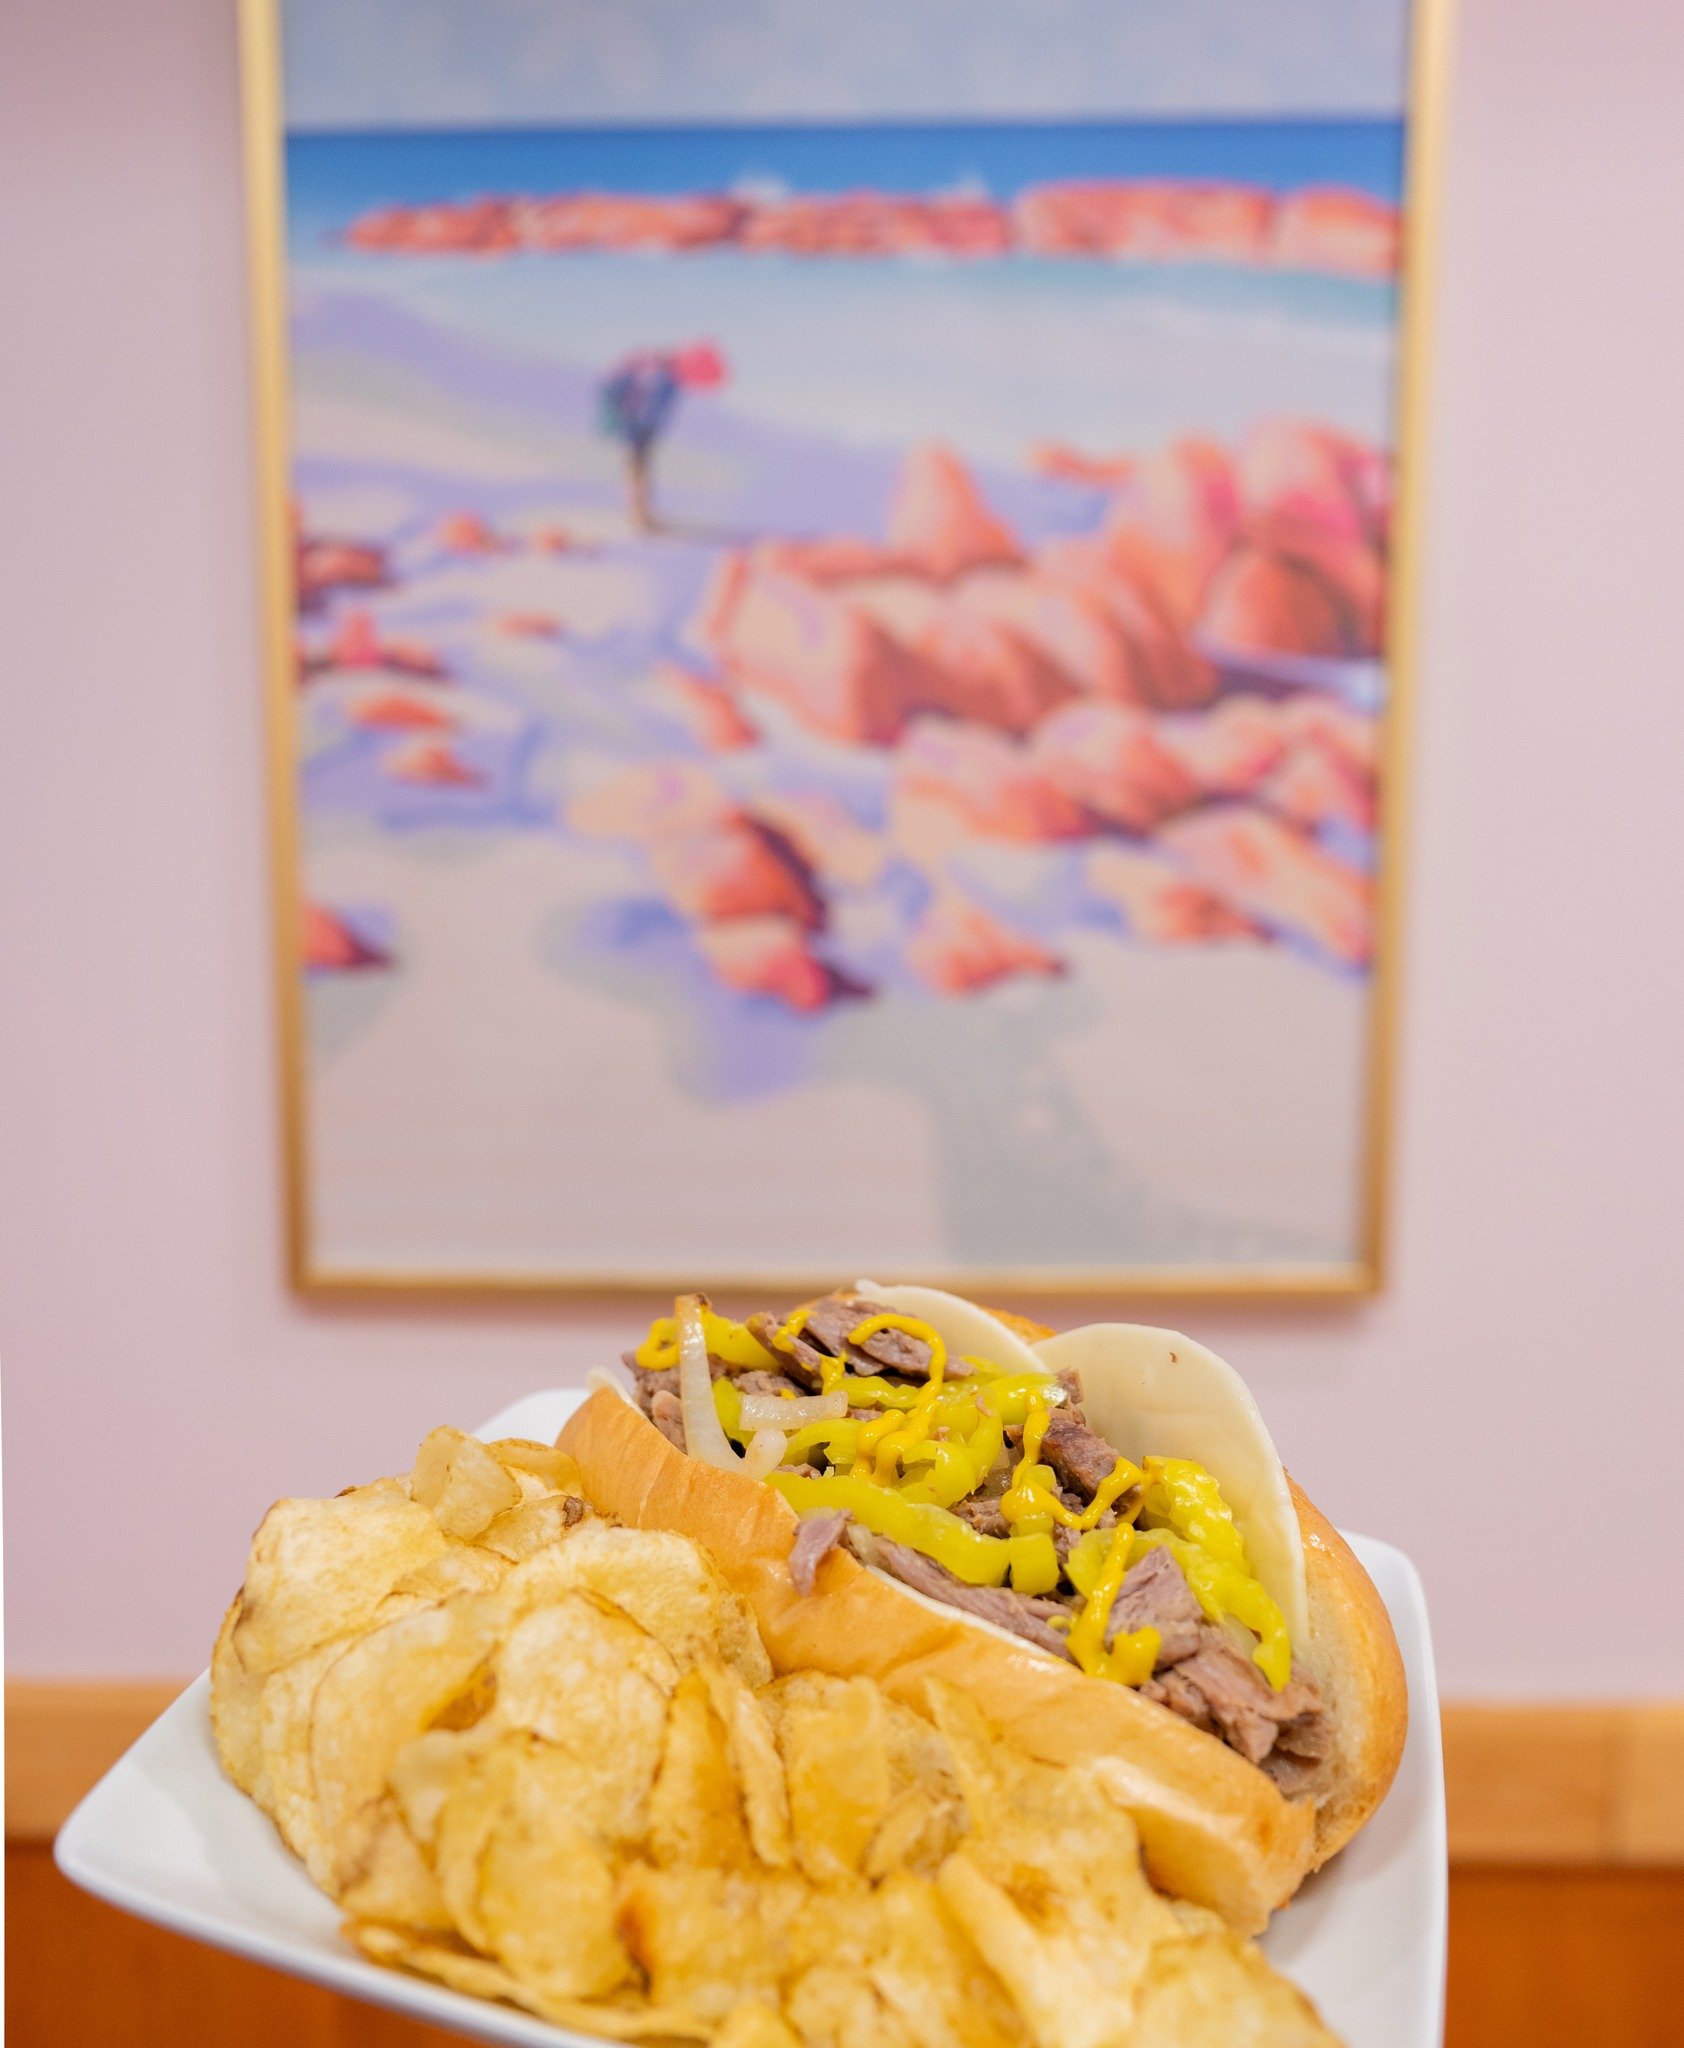 Miss Po's time in the spotlight is winding down!! 🤩

Come grab this special while you still can -- available in Bath and Portland!

Made with homemade pot roast, onion, banana peppers, dijon aioli, provolone cheese served on a sub roll 🩷